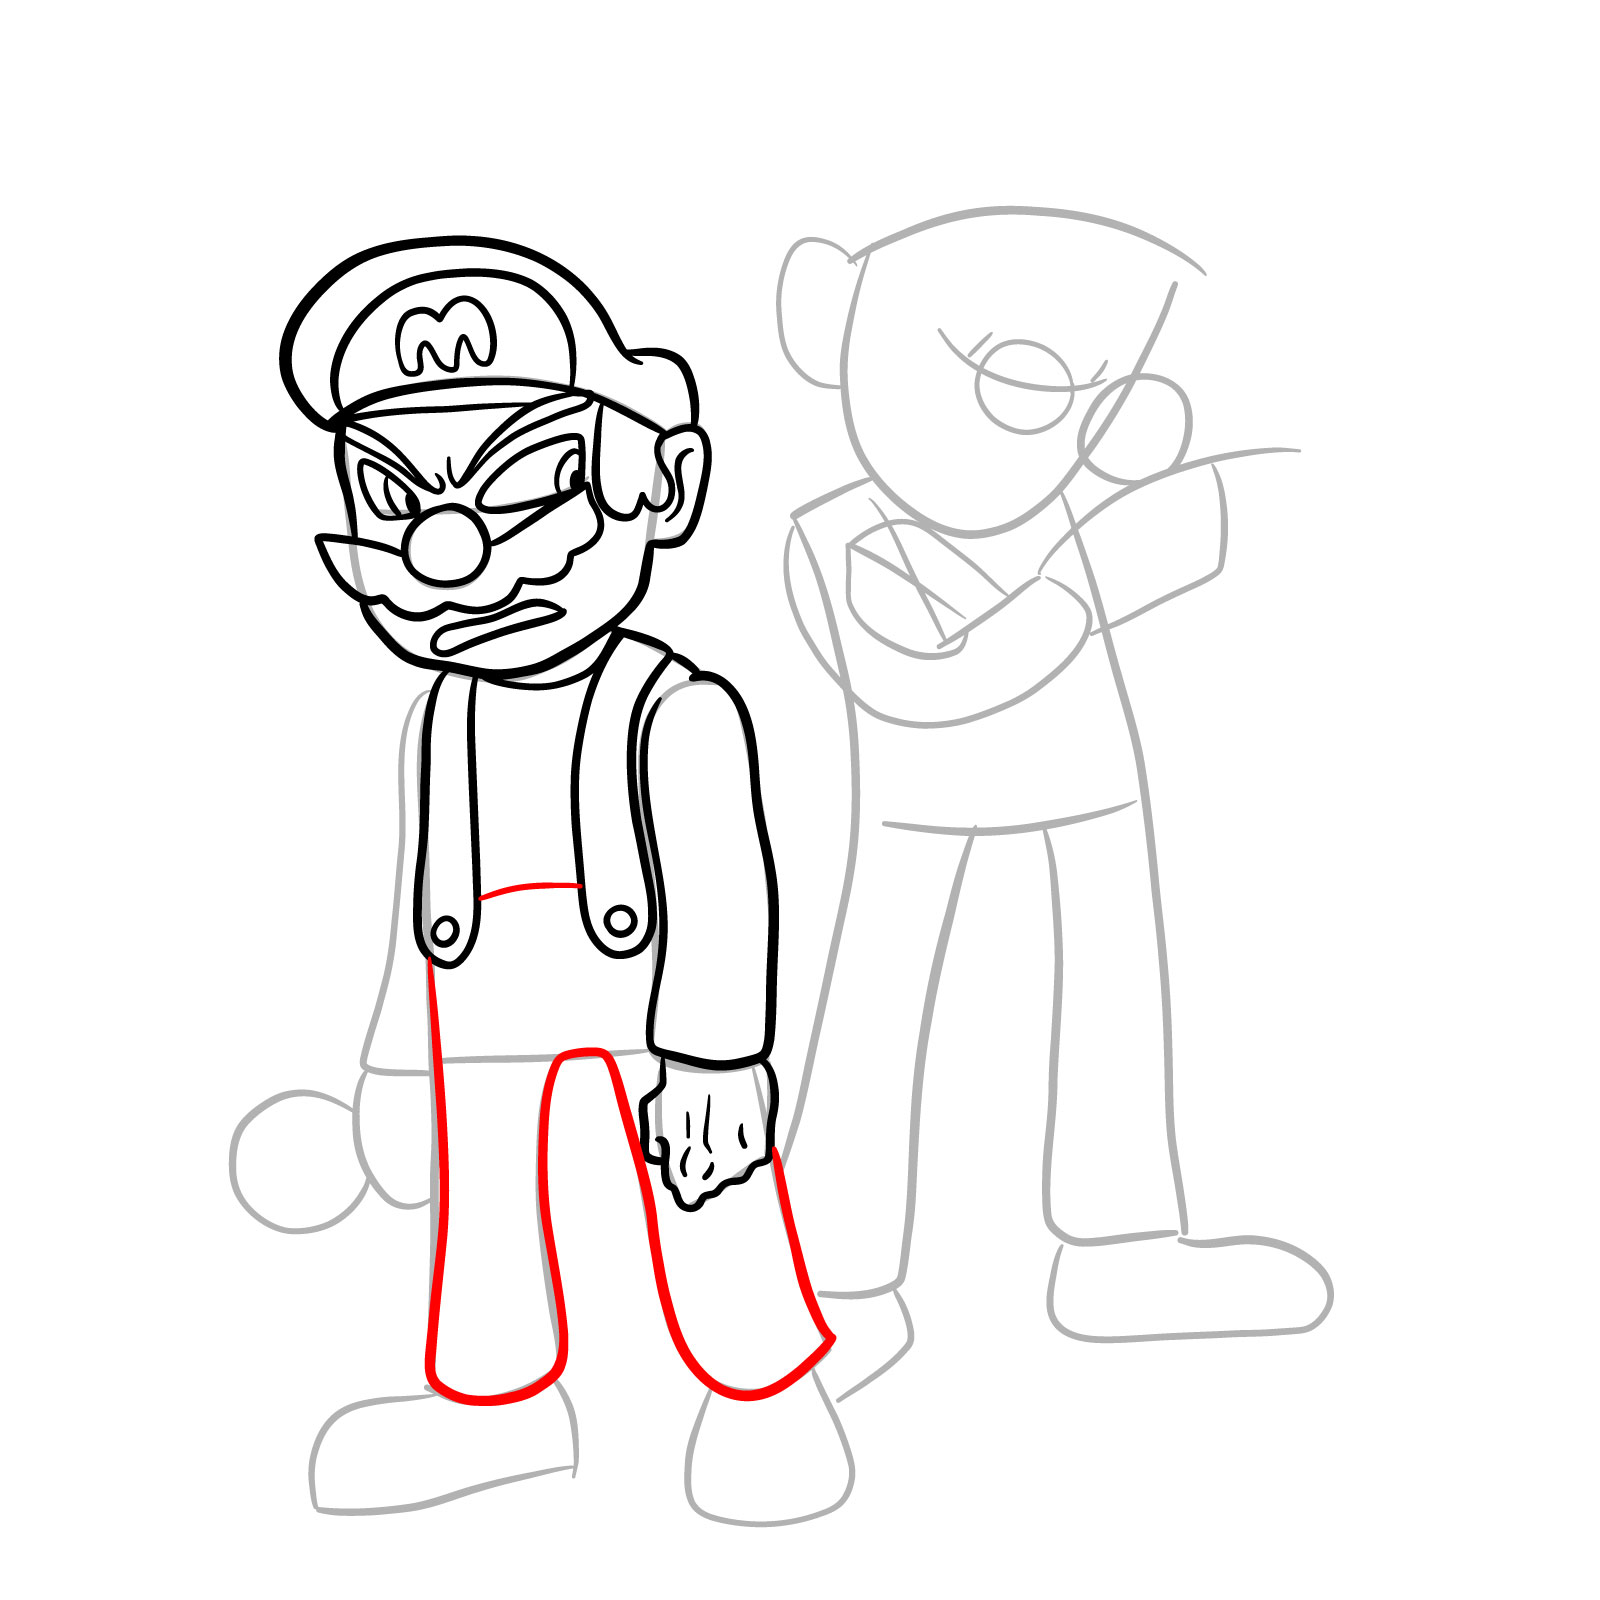 How to draw Mario and Luigi from Tails Gets Trolled - step 17